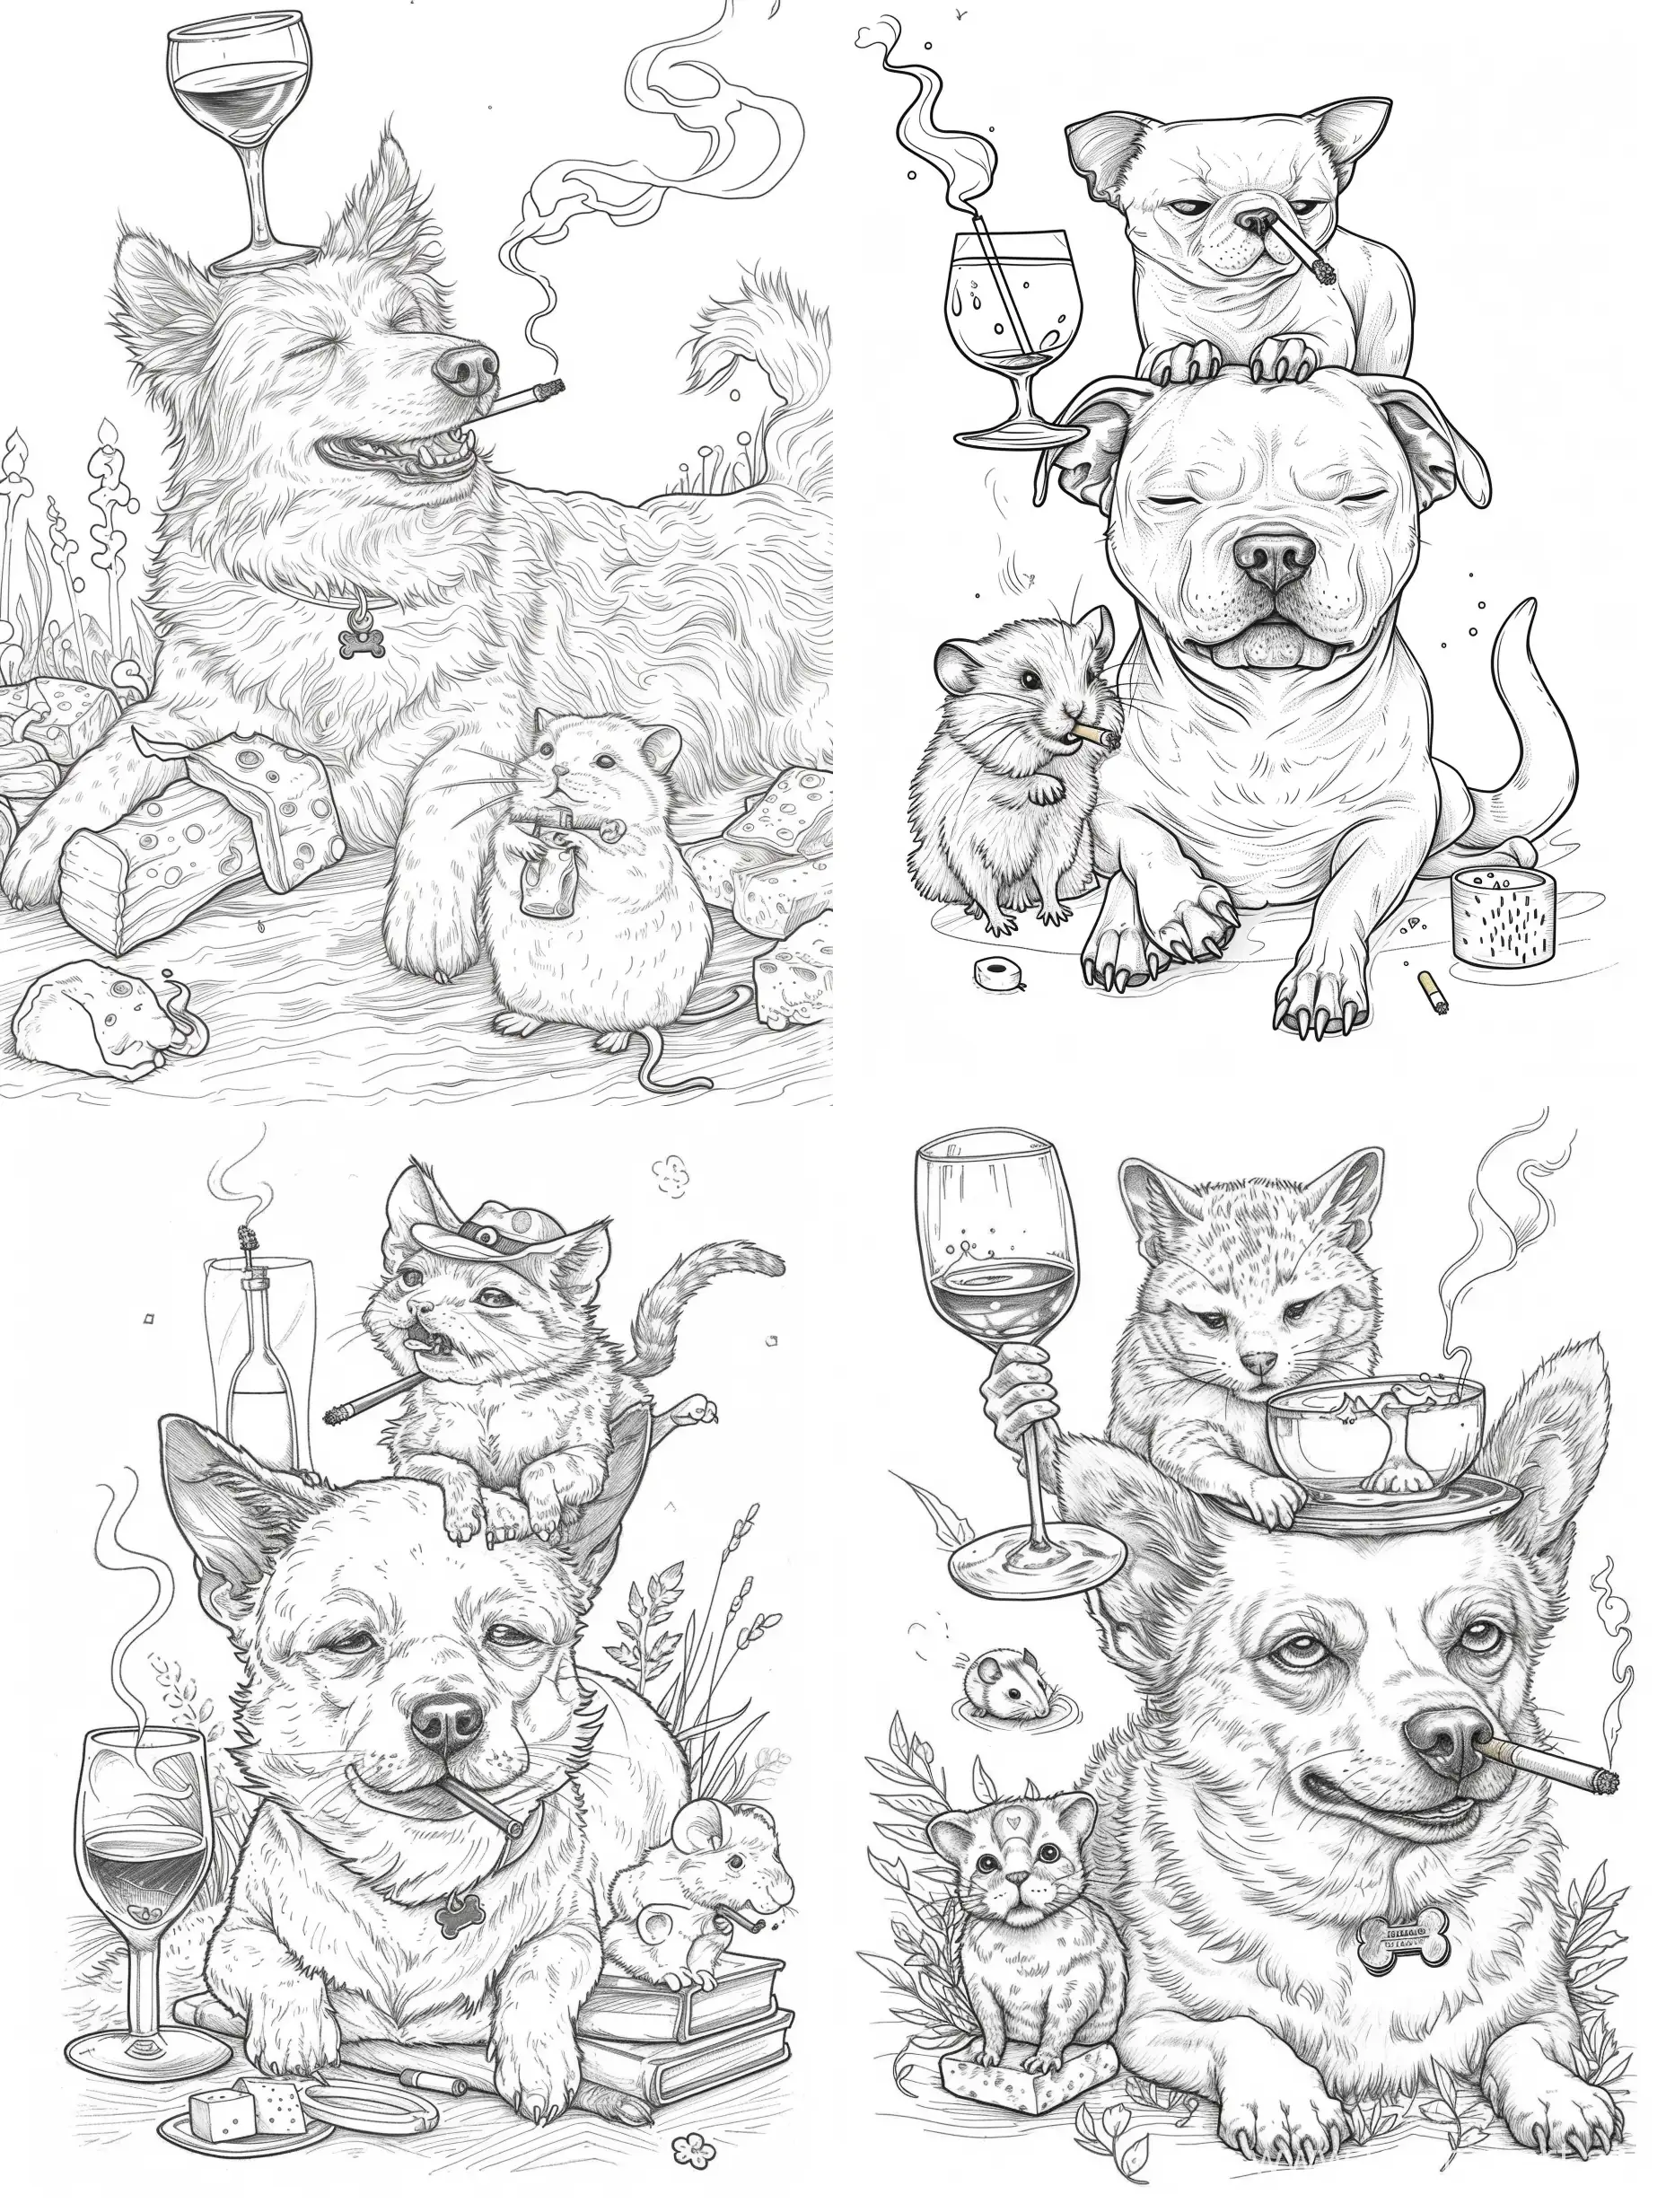 Minimalistic-Coloring-Book-for-Children-Dog-with-Wine-Cat-Smoking-Hamster-Eating-Cheese